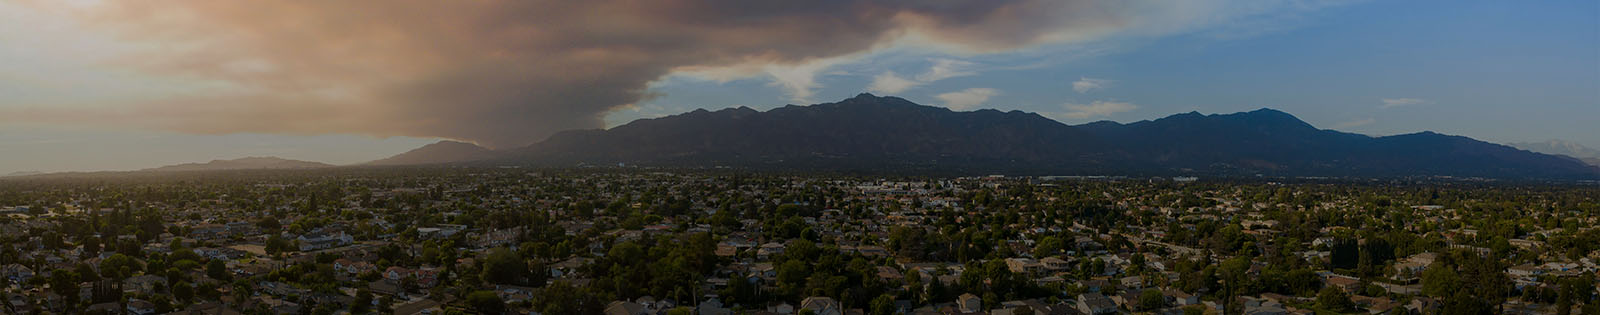 Sunny aerial view of big smoke cause by wildfire over Arcadia area.